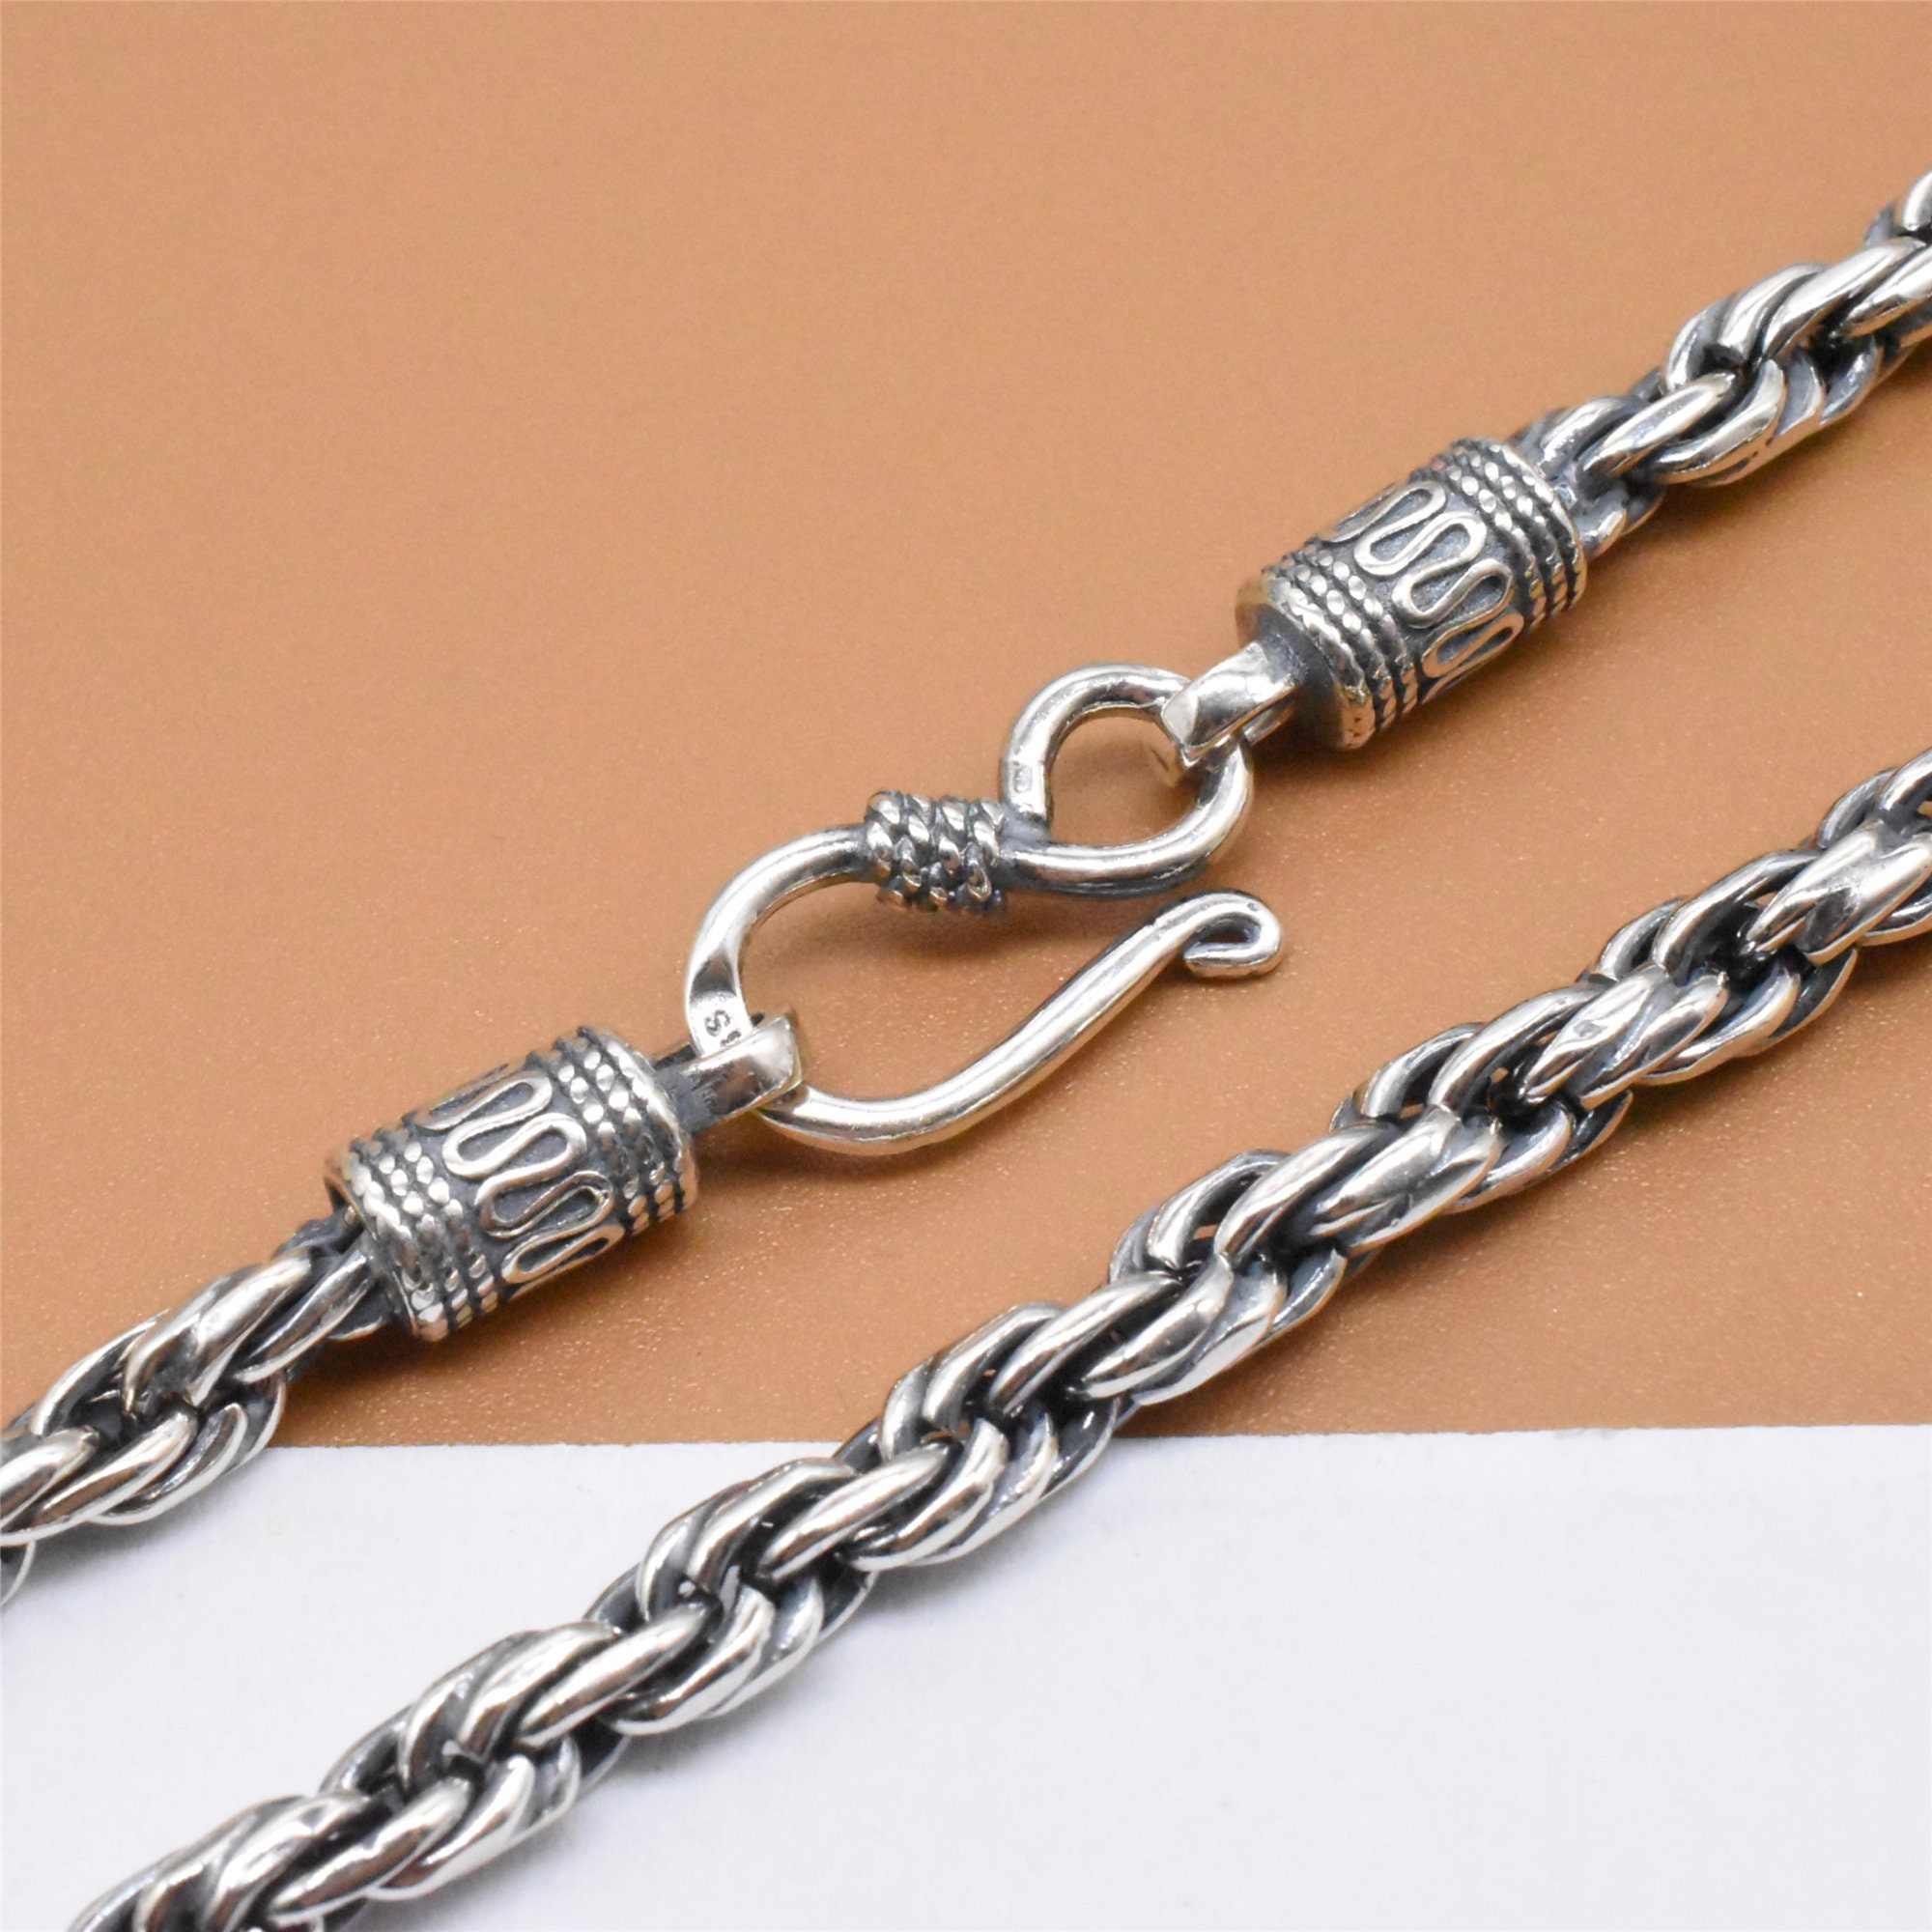 4mm 925 Silver Rope Chain Necklace Sterling Silver 16 18 20 22 24 26 2 –  Daniel J